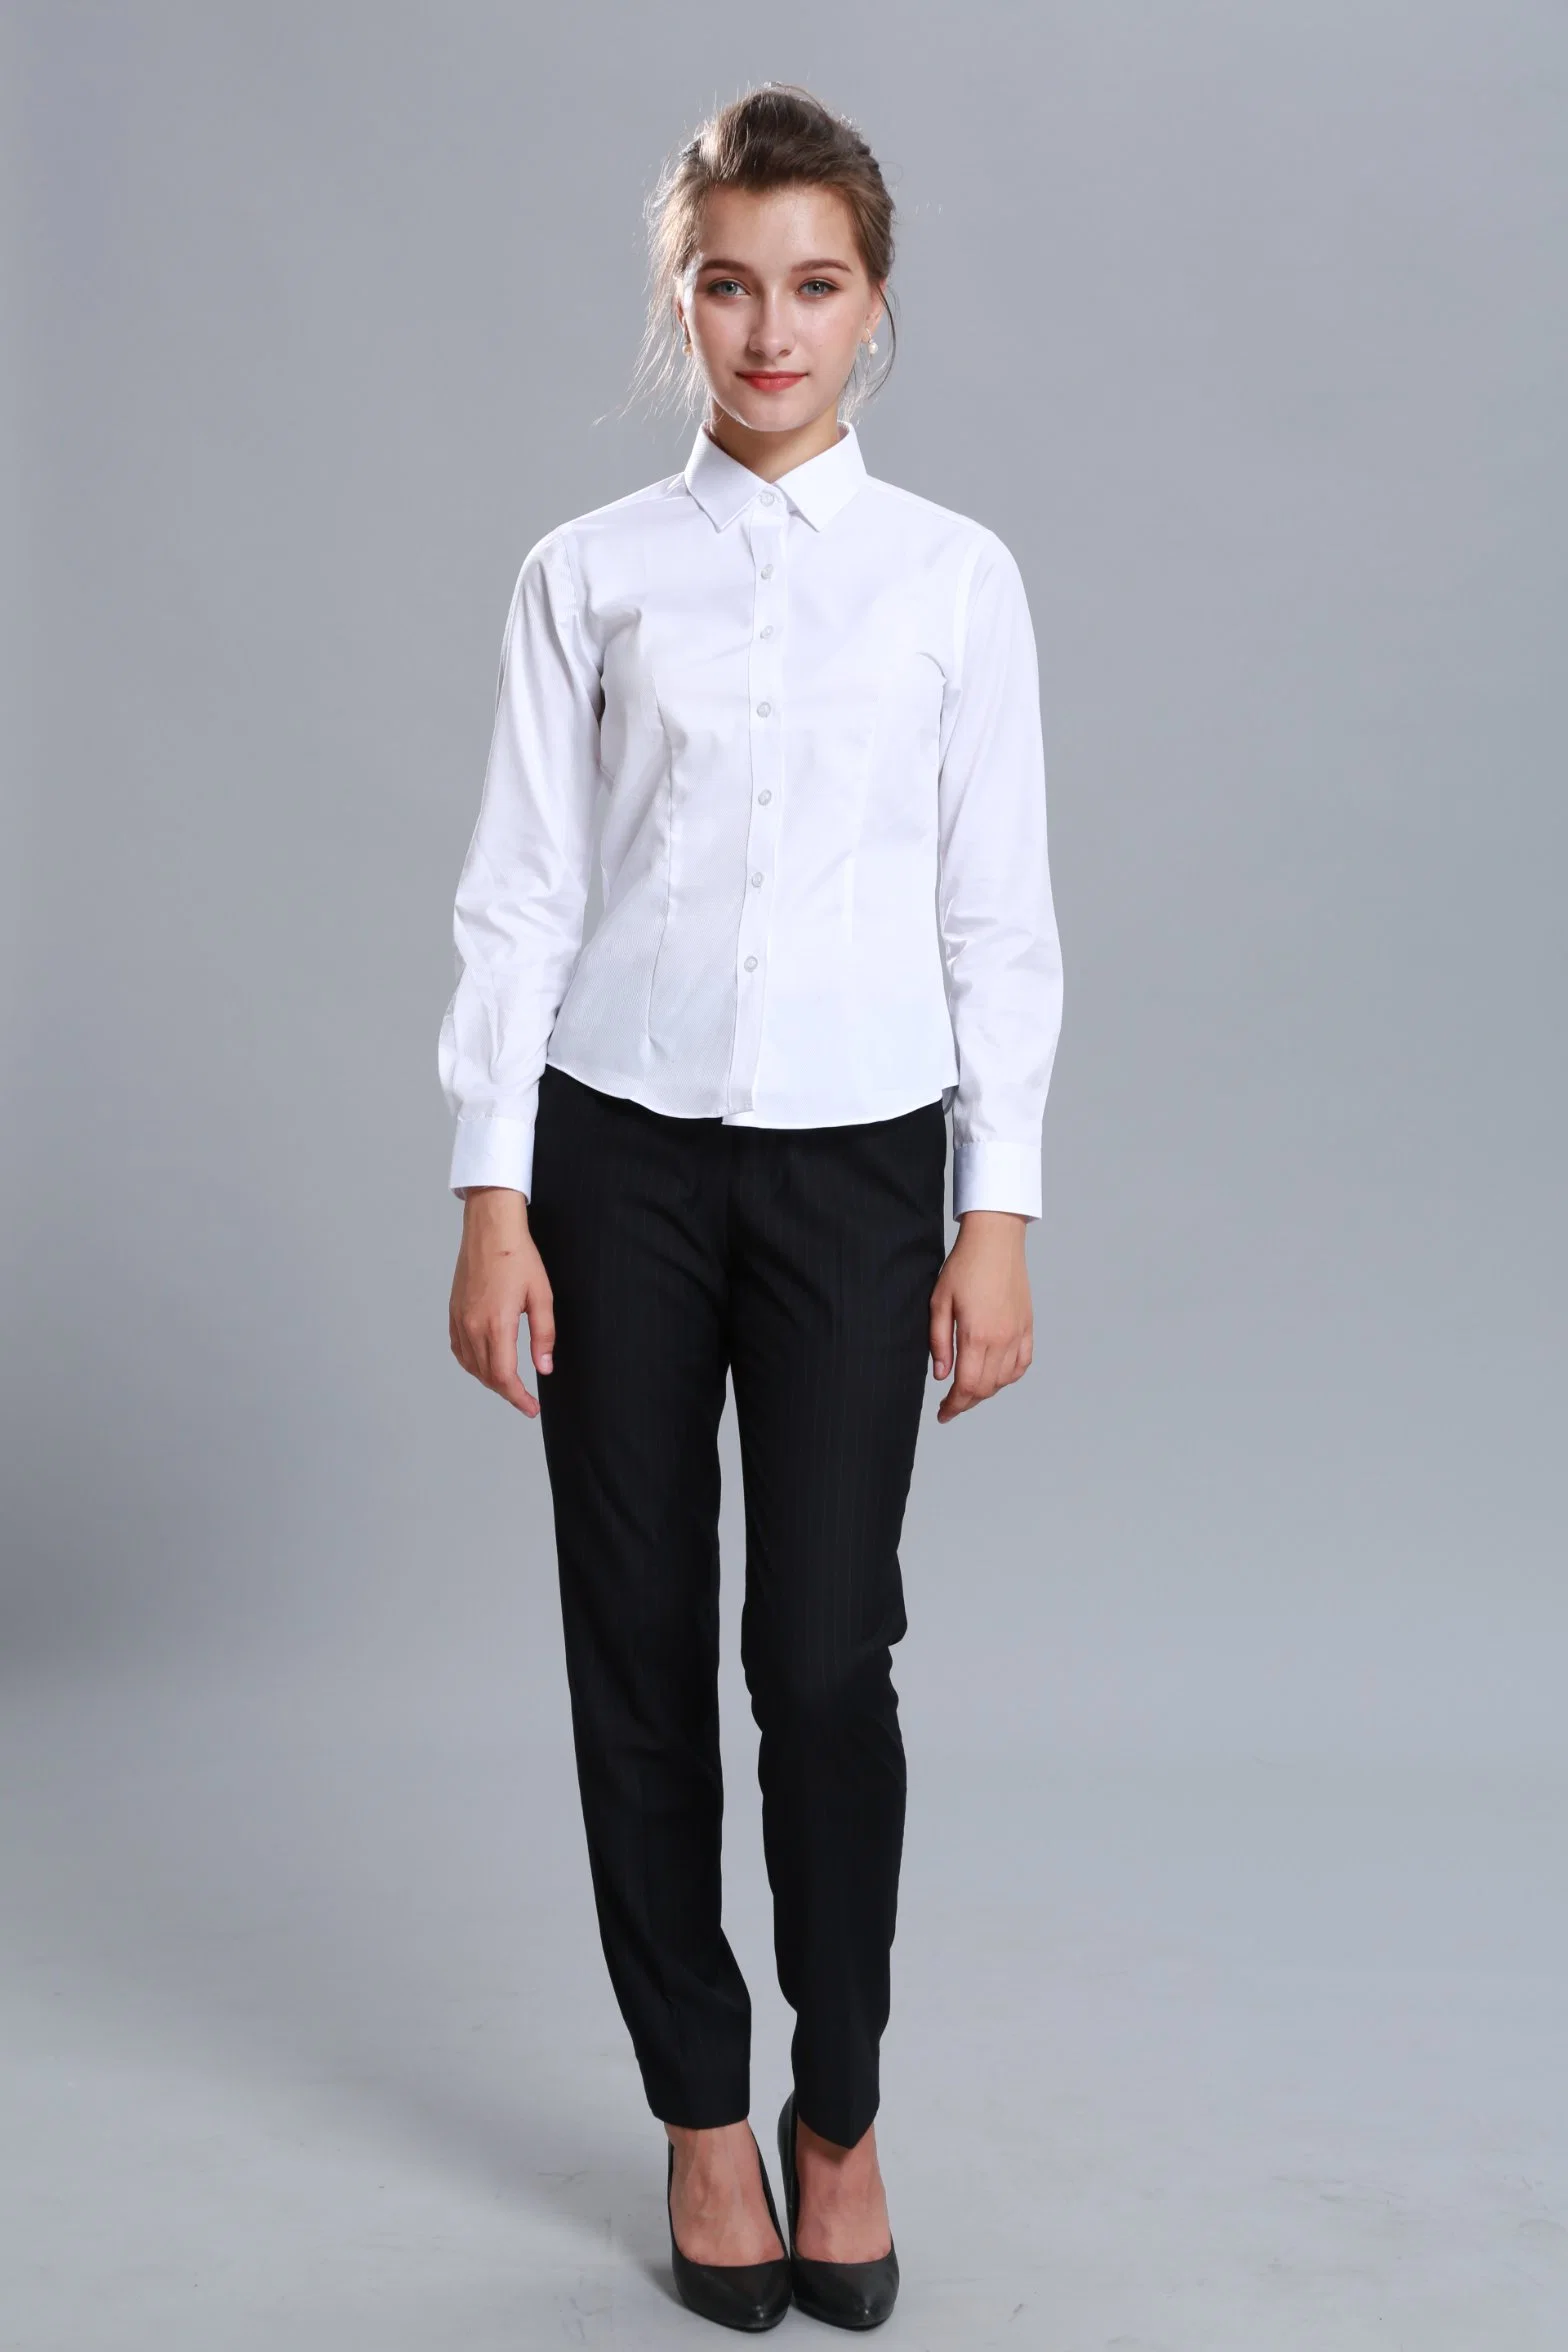 OEM Shirts, Blouse Overalls, Professional Clothes, Long-Sleeved Shirts Wholesale/Supplier Customization